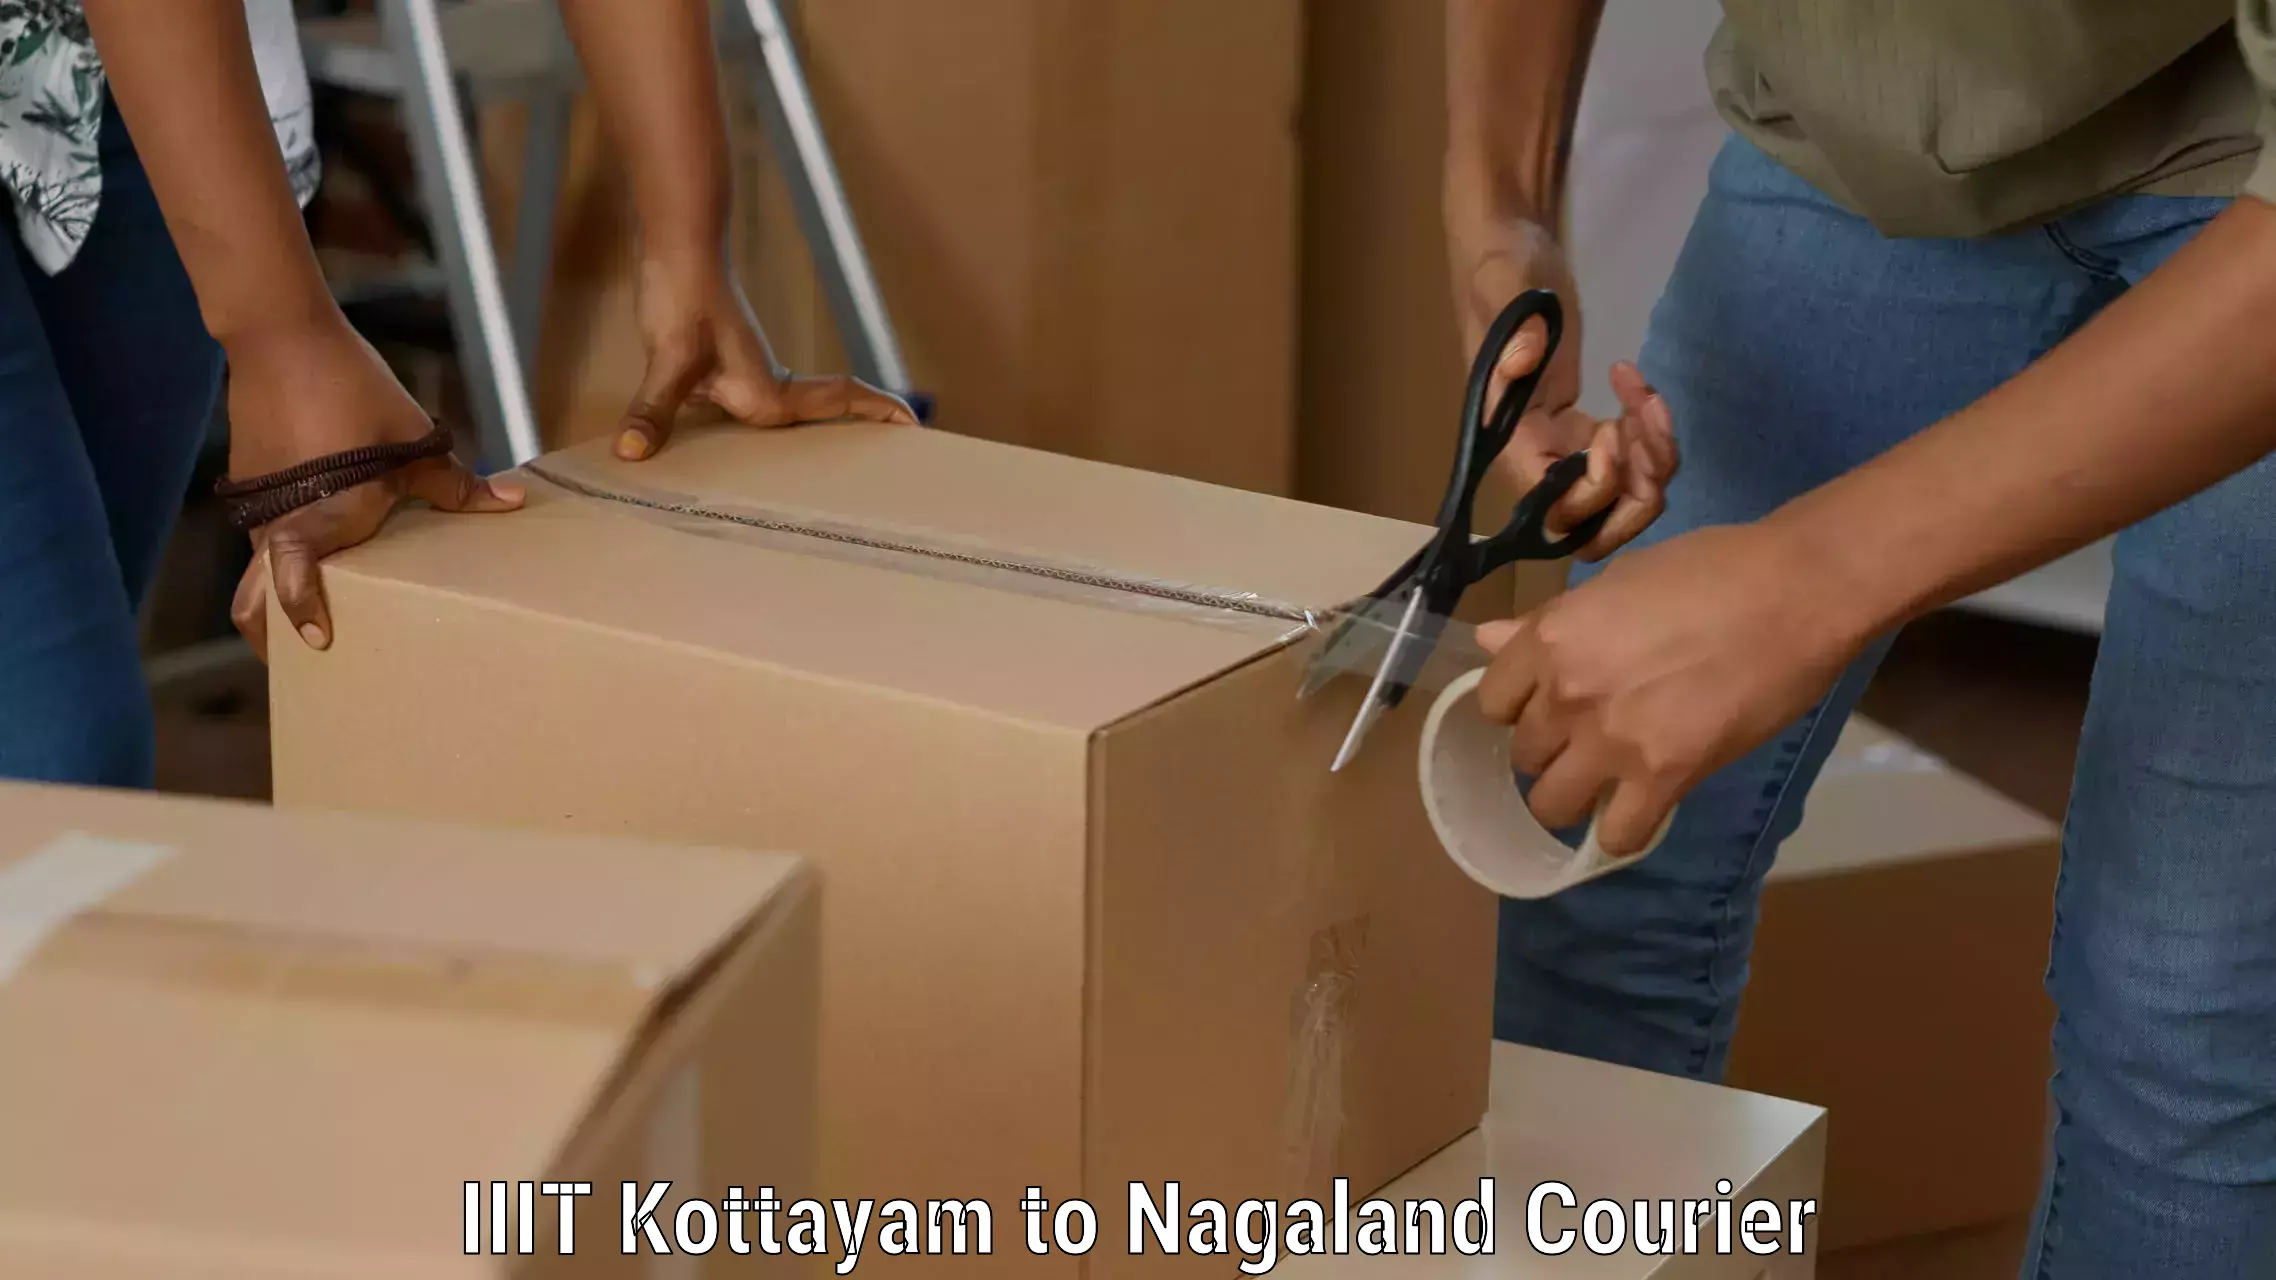 Small parcel delivery IIIT Kottayam to Nagaland